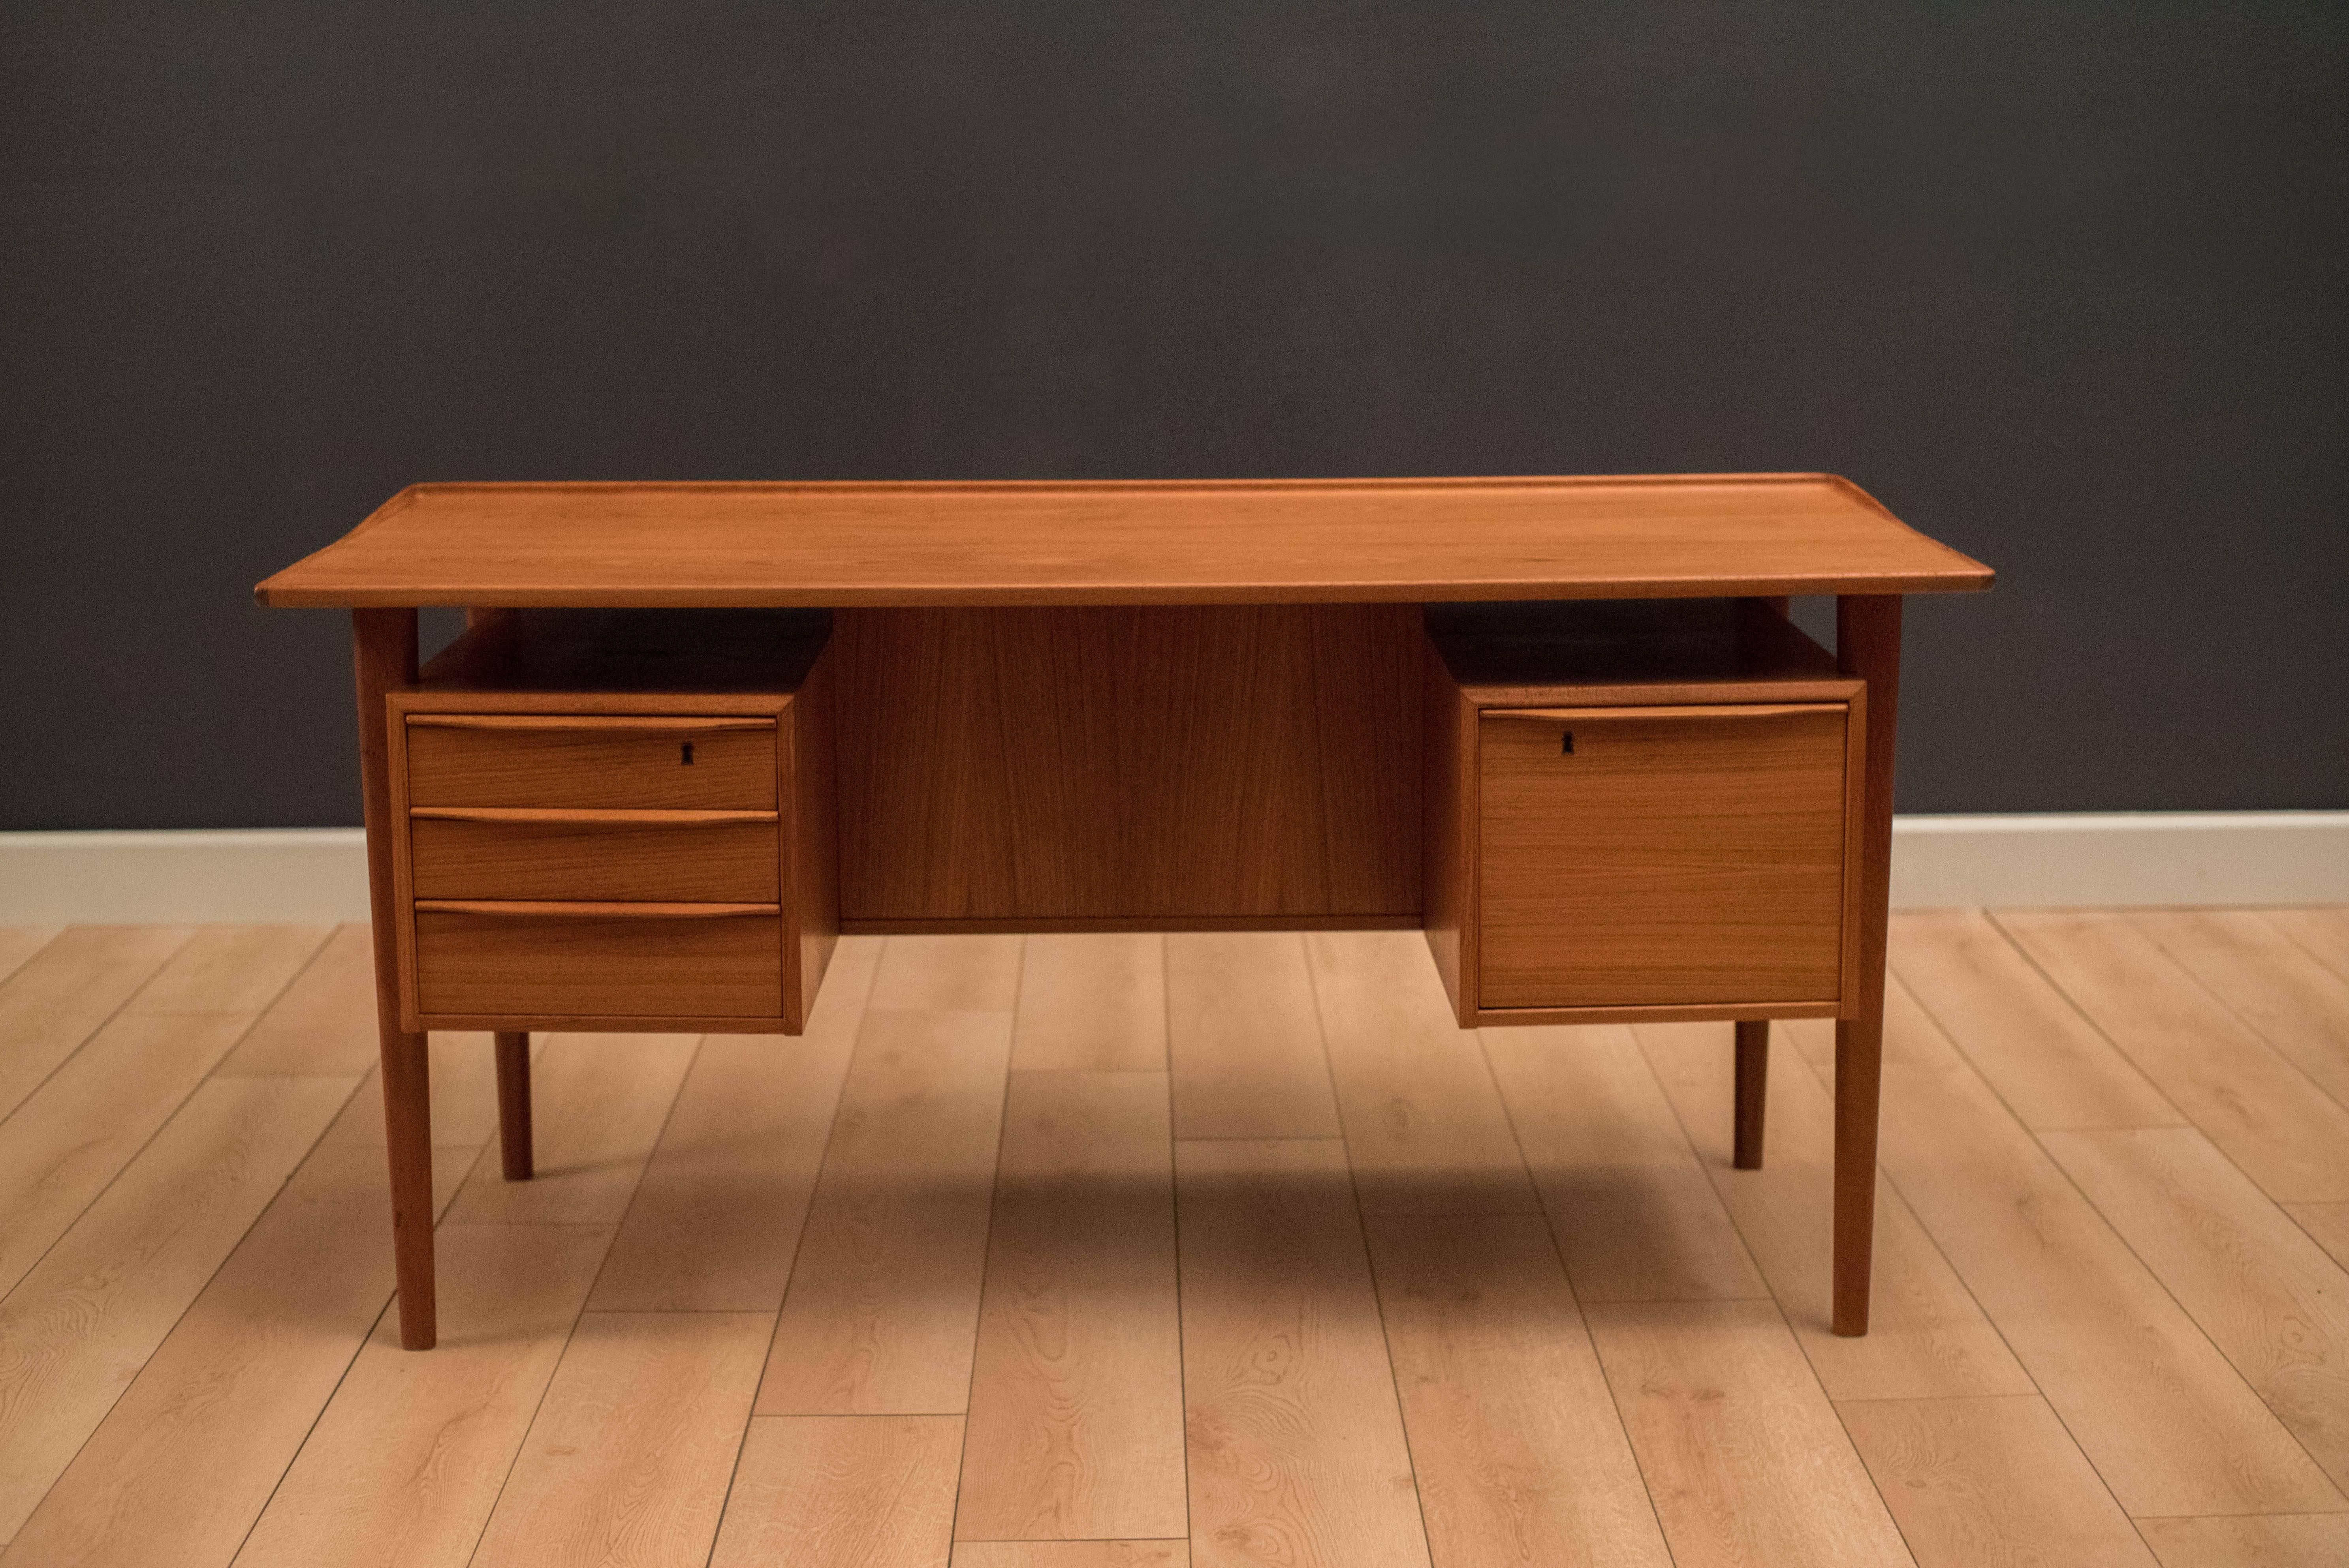 Danish executive desk designed by Peter Lovig Nielsen for Dansk in teak. Features sculpted teak drawer handles and a raised edge top. This piece includes three dovetailed drawers and a file drawer. The back is finished with a bookshelf and can be